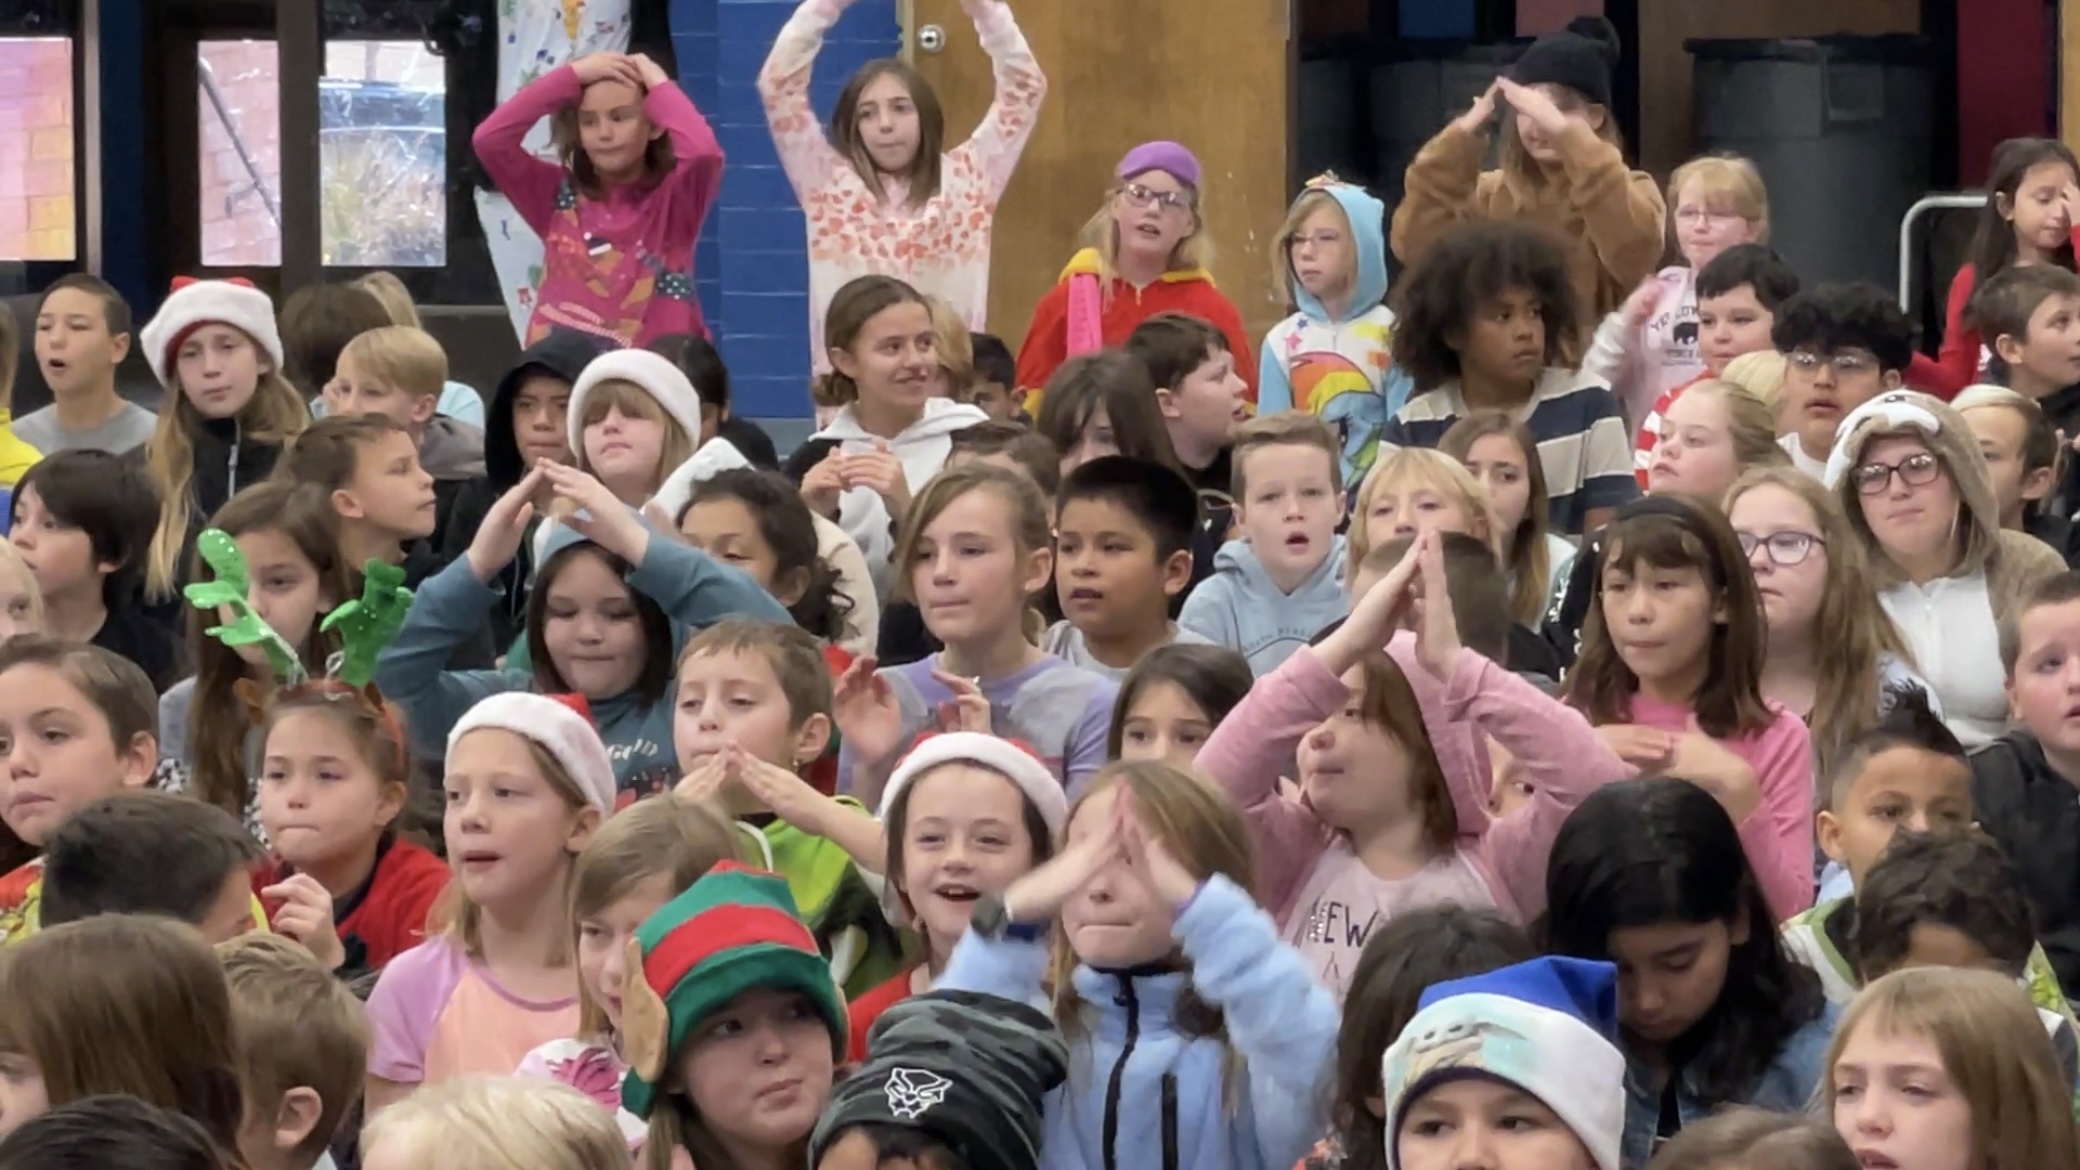 Students singing Christmas songs on the last day of school before Christmas Vacation